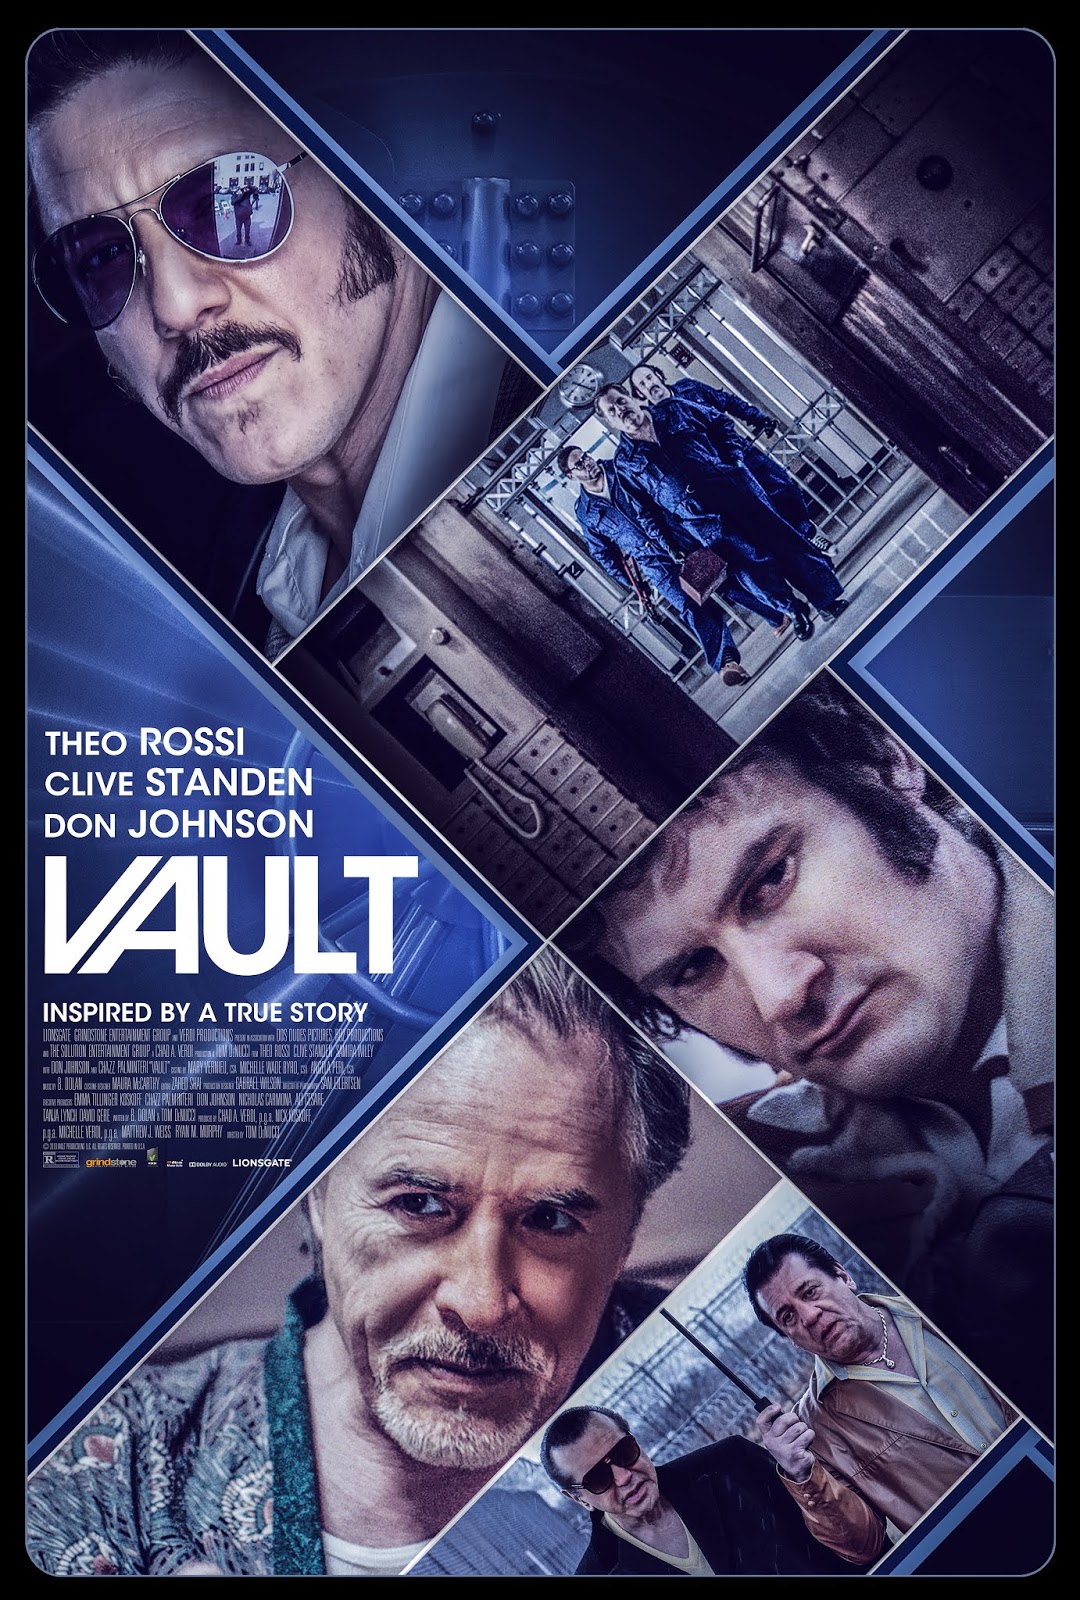 Film Intuition: Review Data
base: Movie Review: Vault (2019)